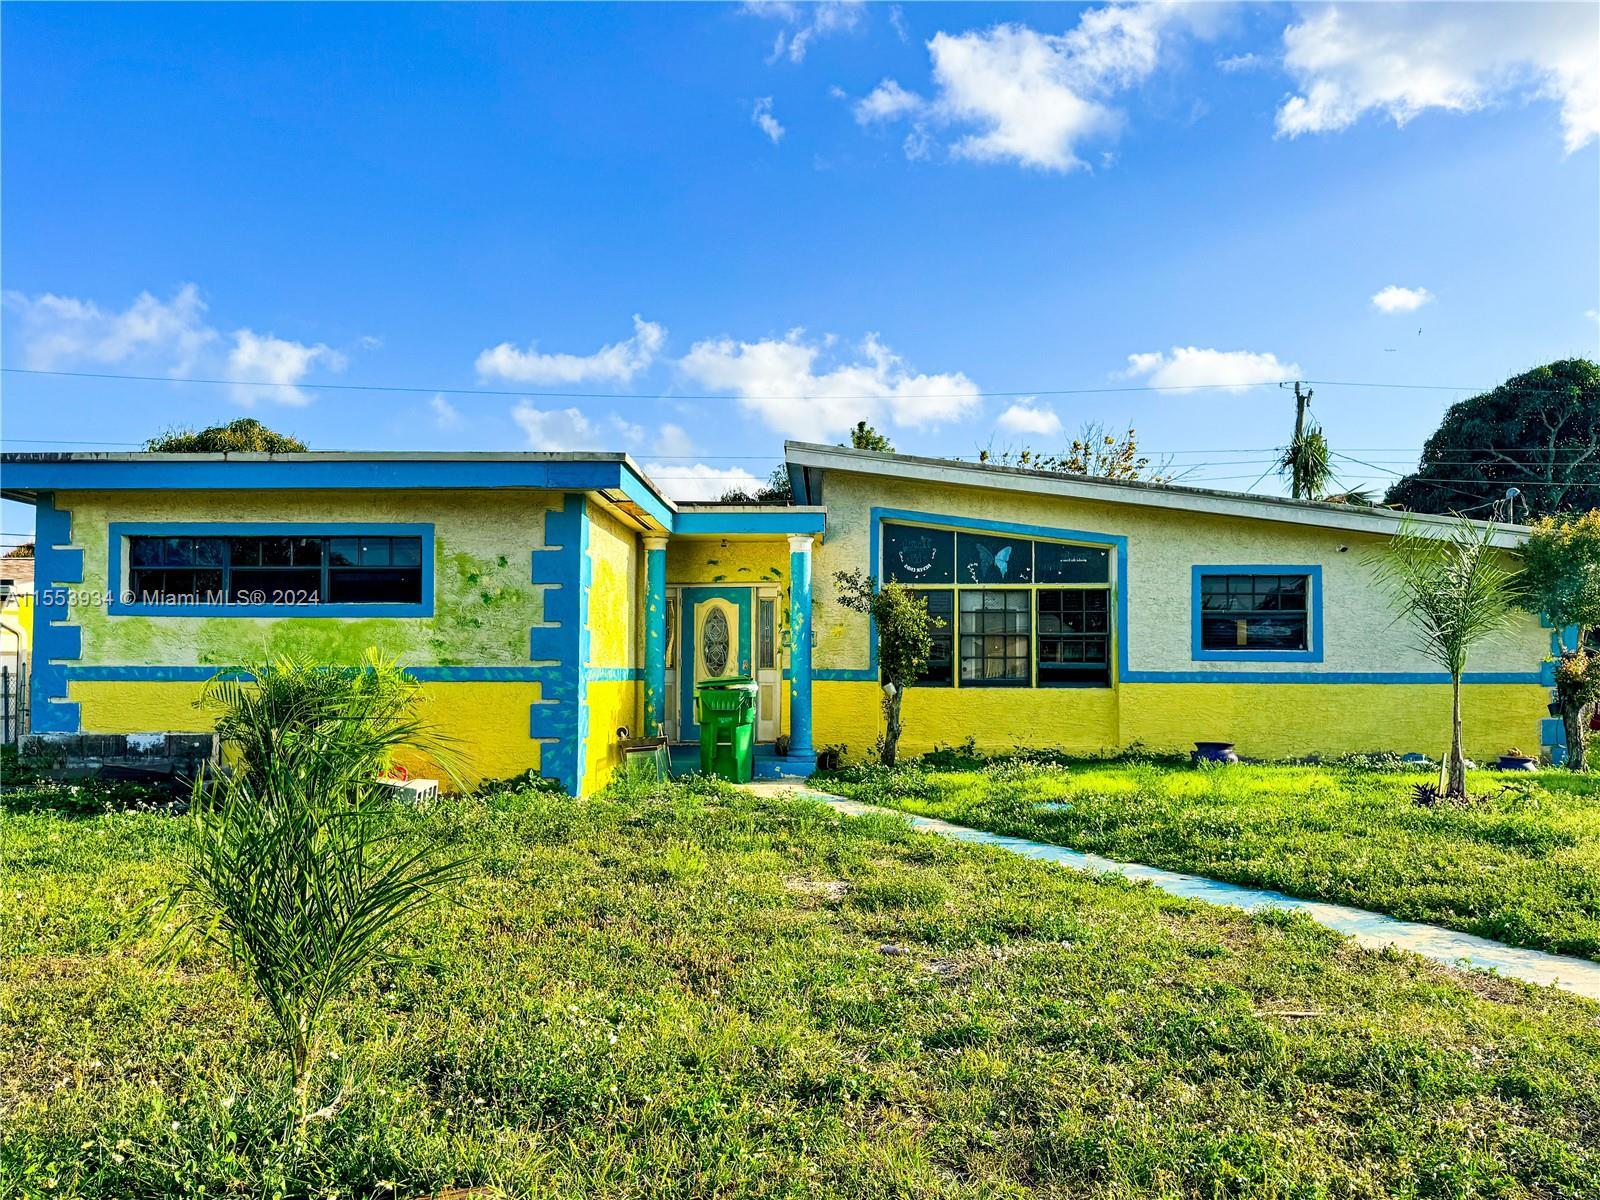 Photo of 1940 NW 187th St in Miami Gardens, FL